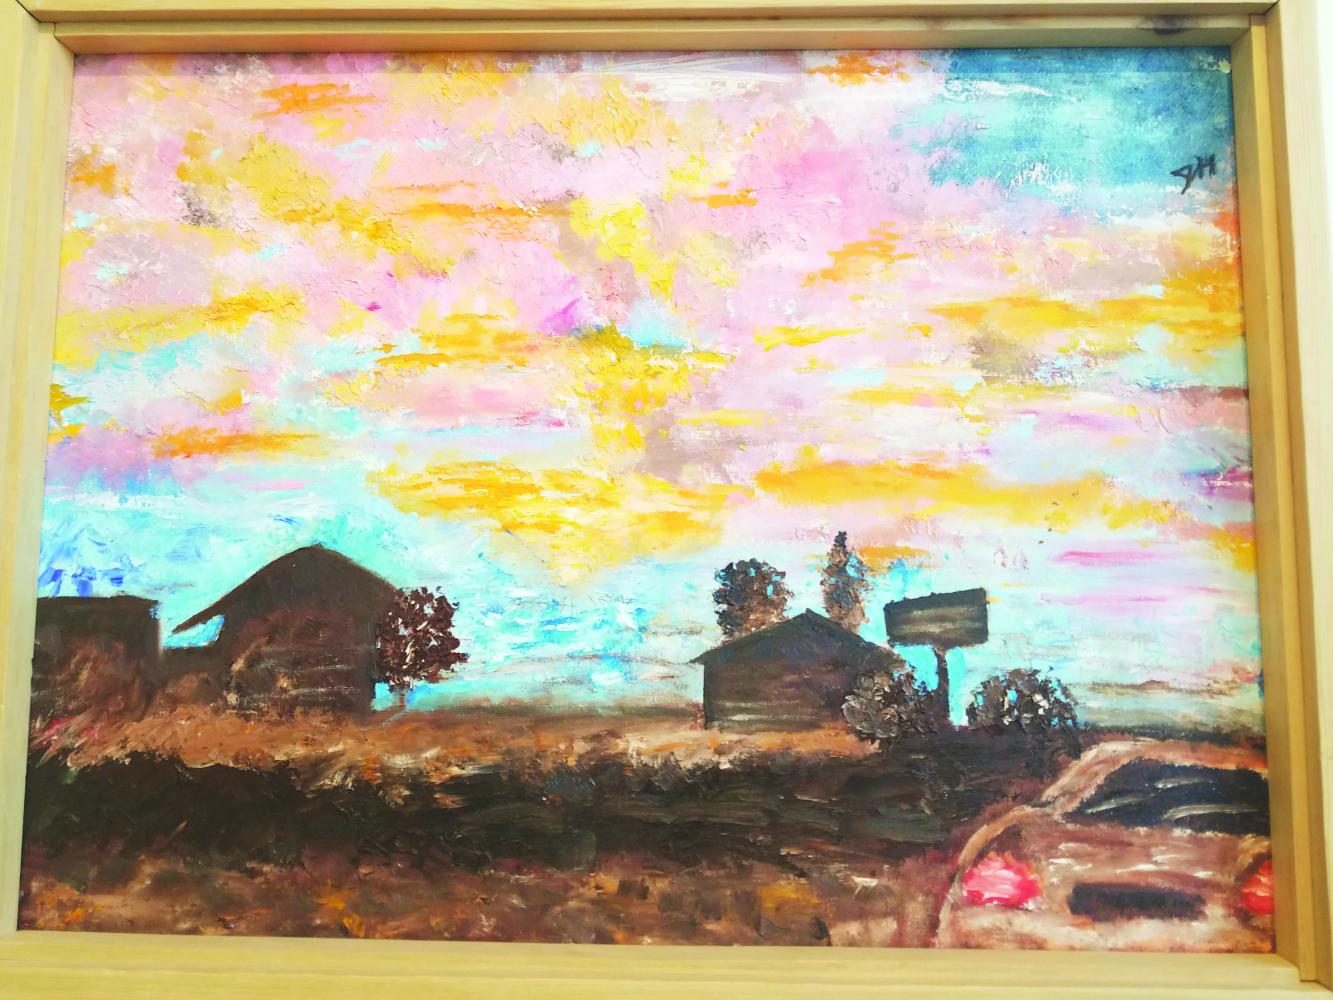 Julia Harrington’s painting “Sunset Road” was part of the 2017 student art exhibit at Center for Arts and History in Lewiston.